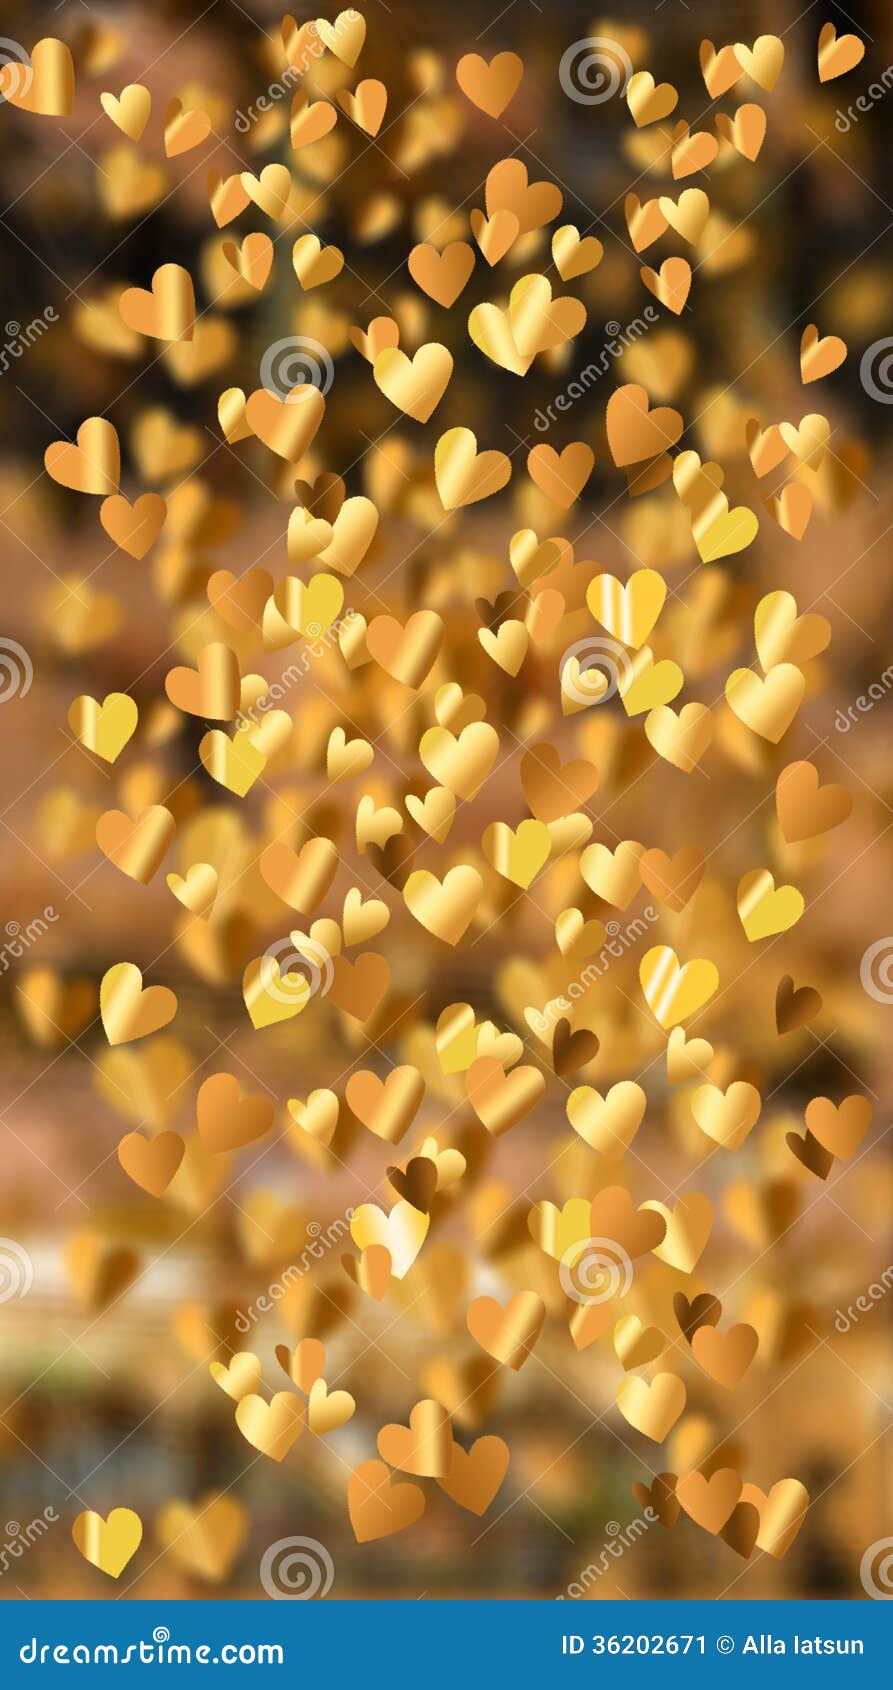 background golden hearts flying collage shiny ceiling which changes dark to light 36202671